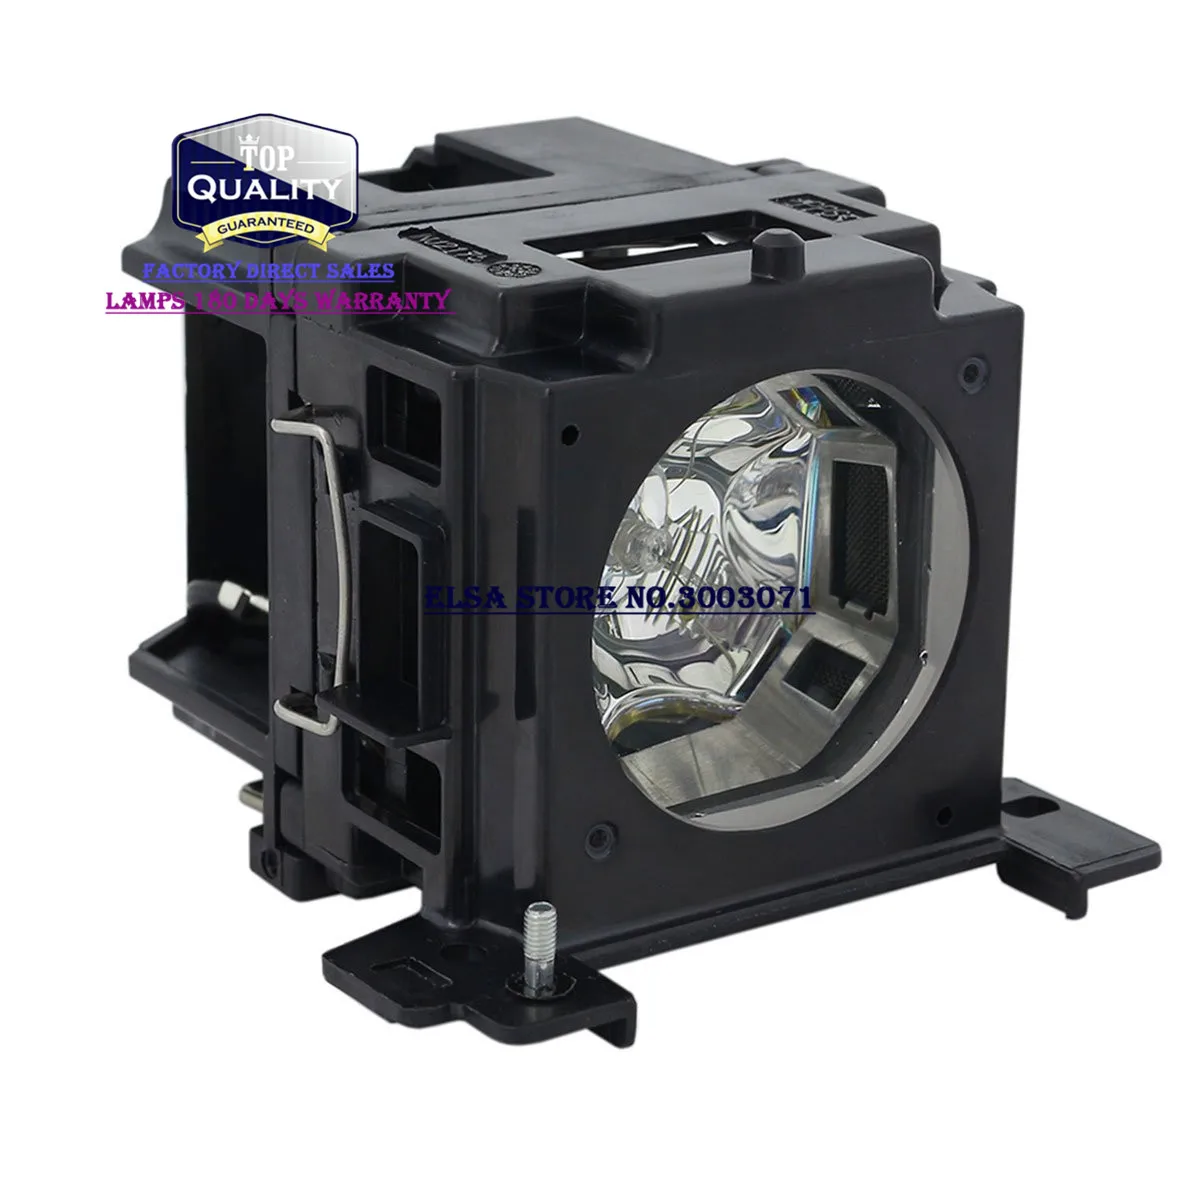 

High Quality DT00731 Compatible projector lamp for use in HITACHI CP-S240 CP-S245 CP-X250 CP-X255 ED-S8240 ED-X8250 ED-X8255